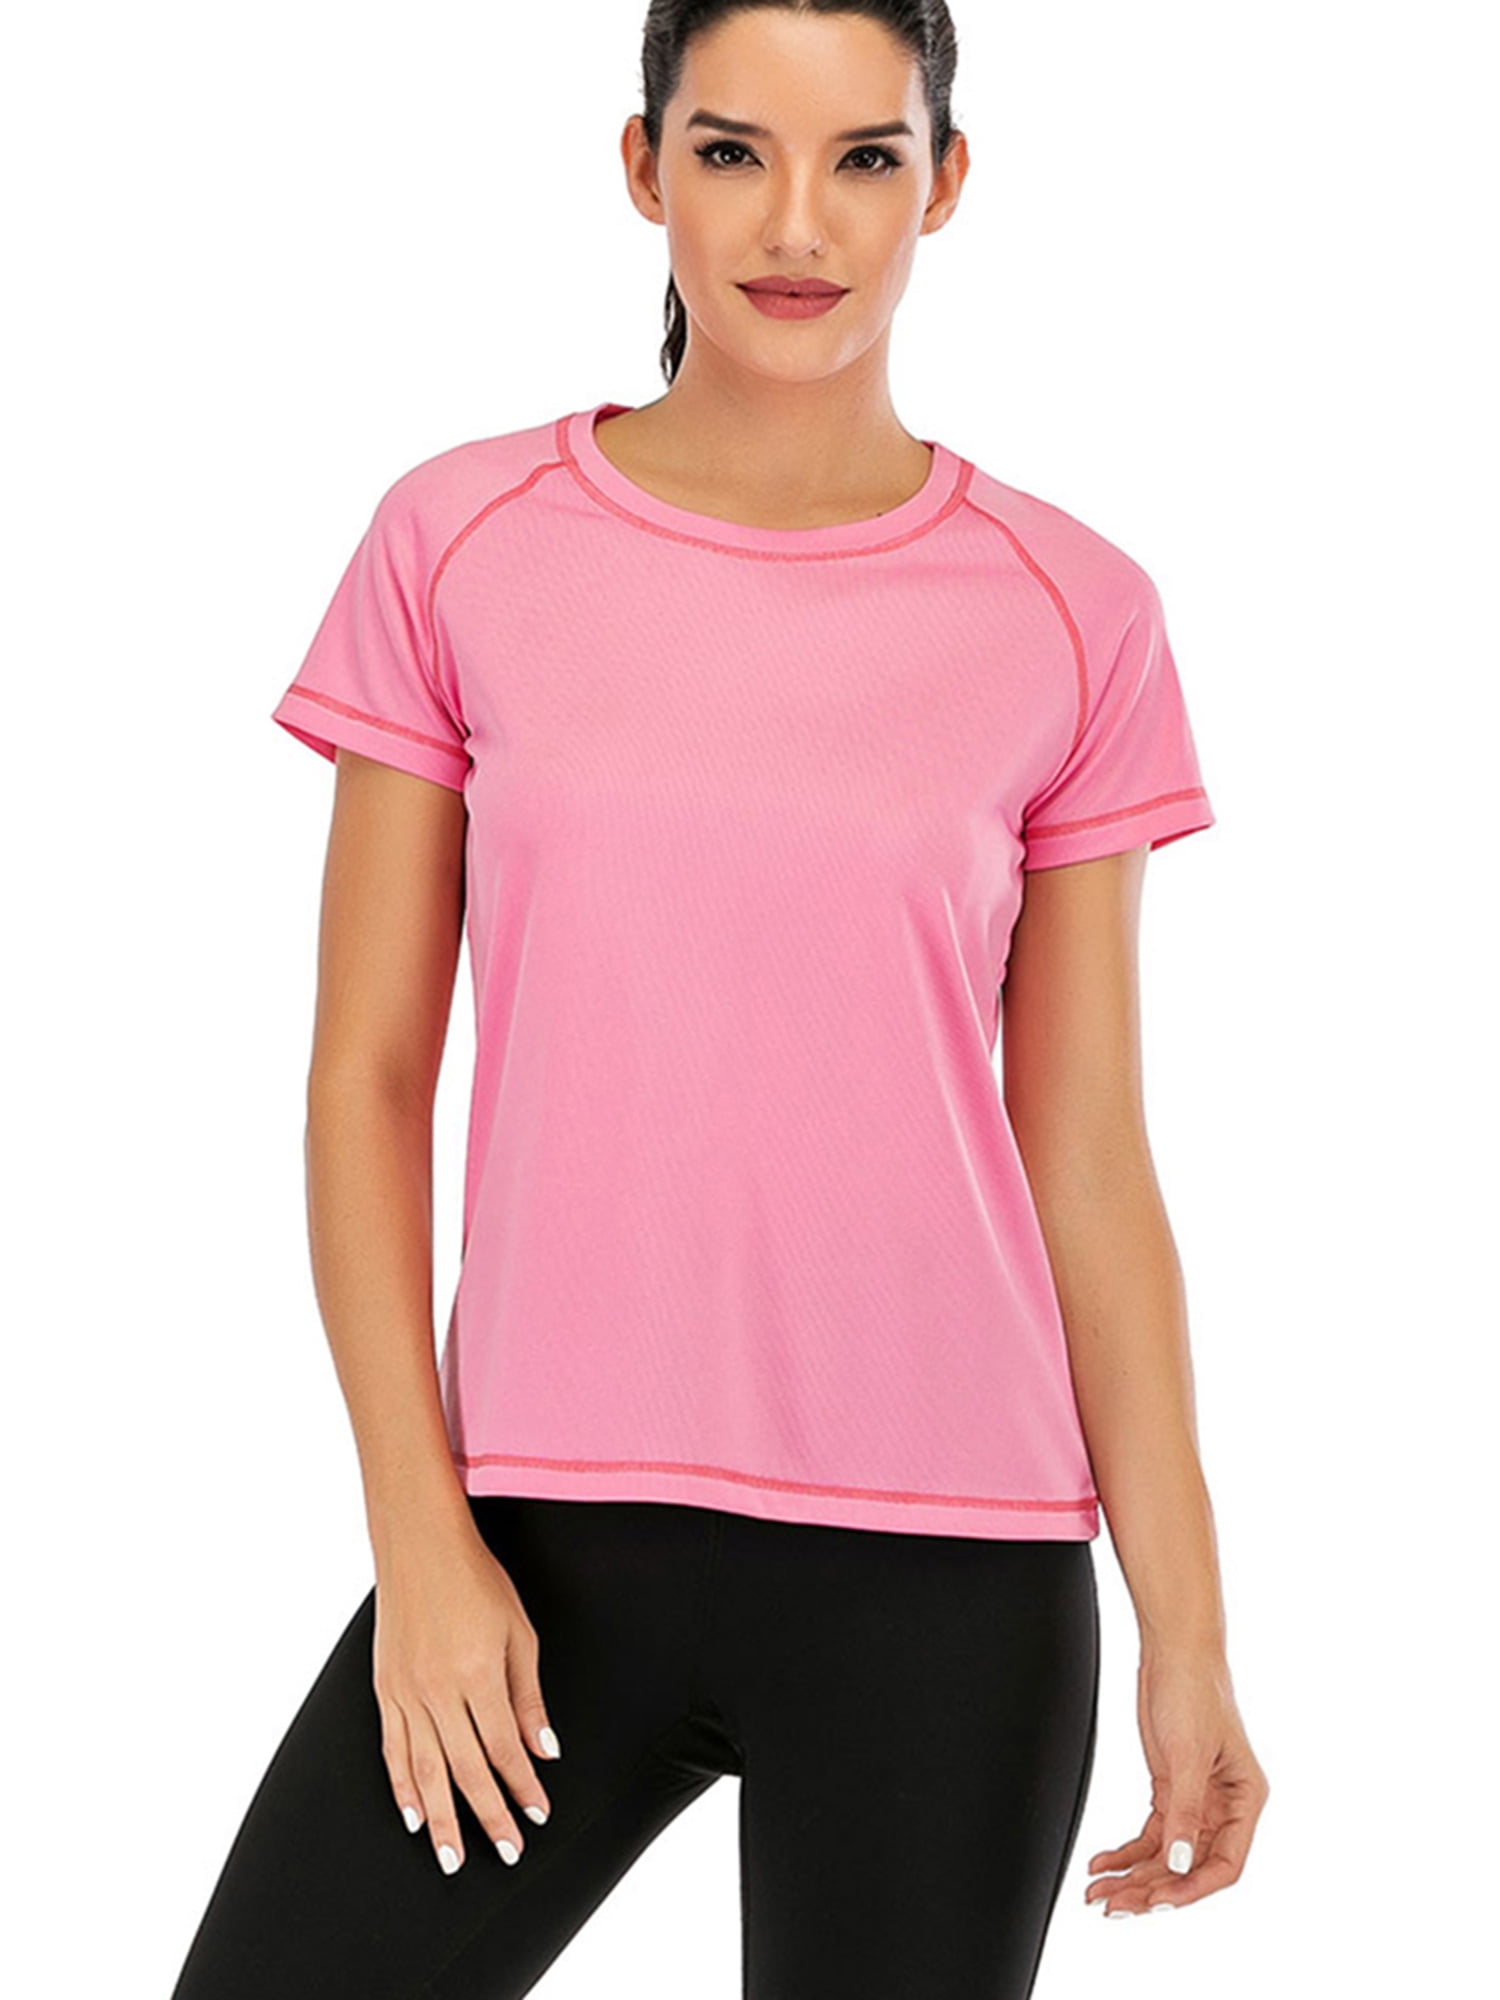 Promover Workout Shirt for Women Flowy Short Sleeve Athletic Tops Yoga Shirts 